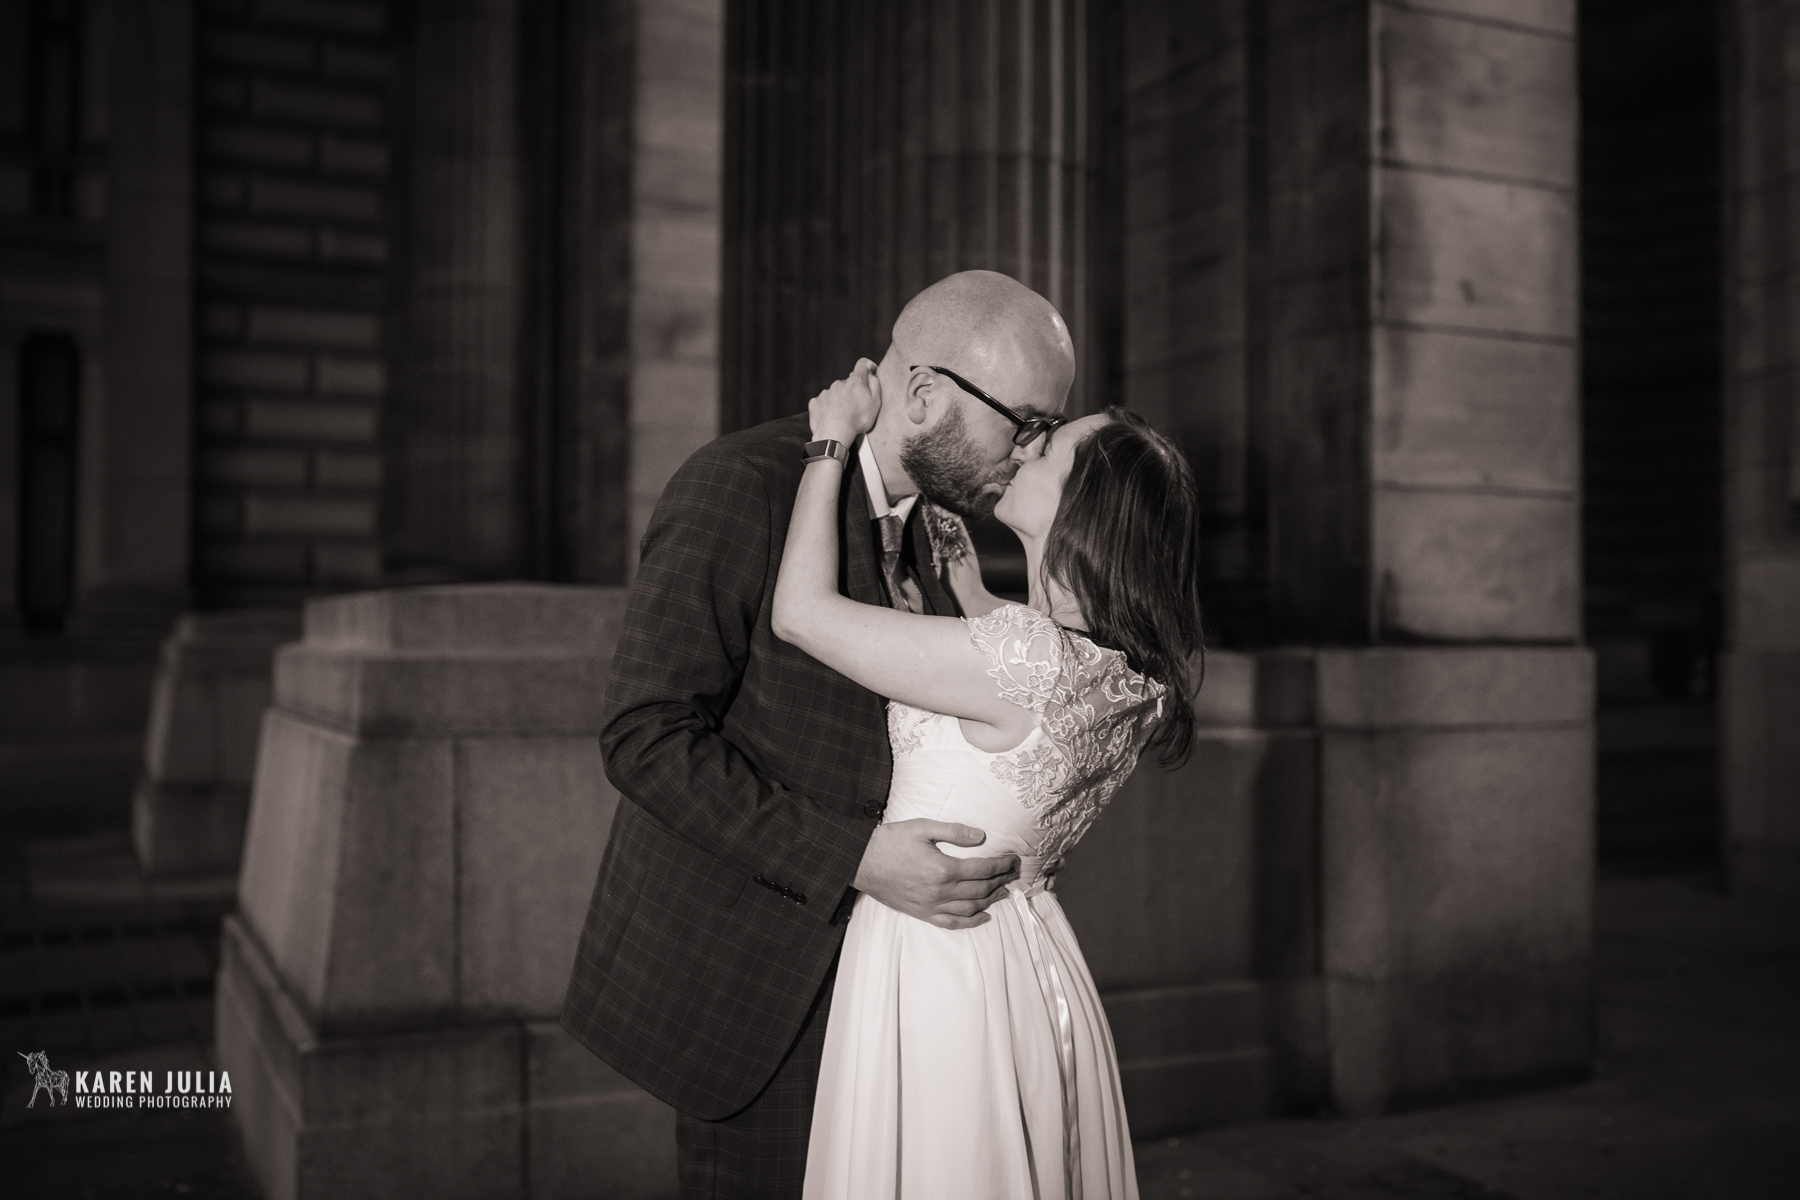 bride and groom embrace for a kiss during their urban city centre wedding portrait session.